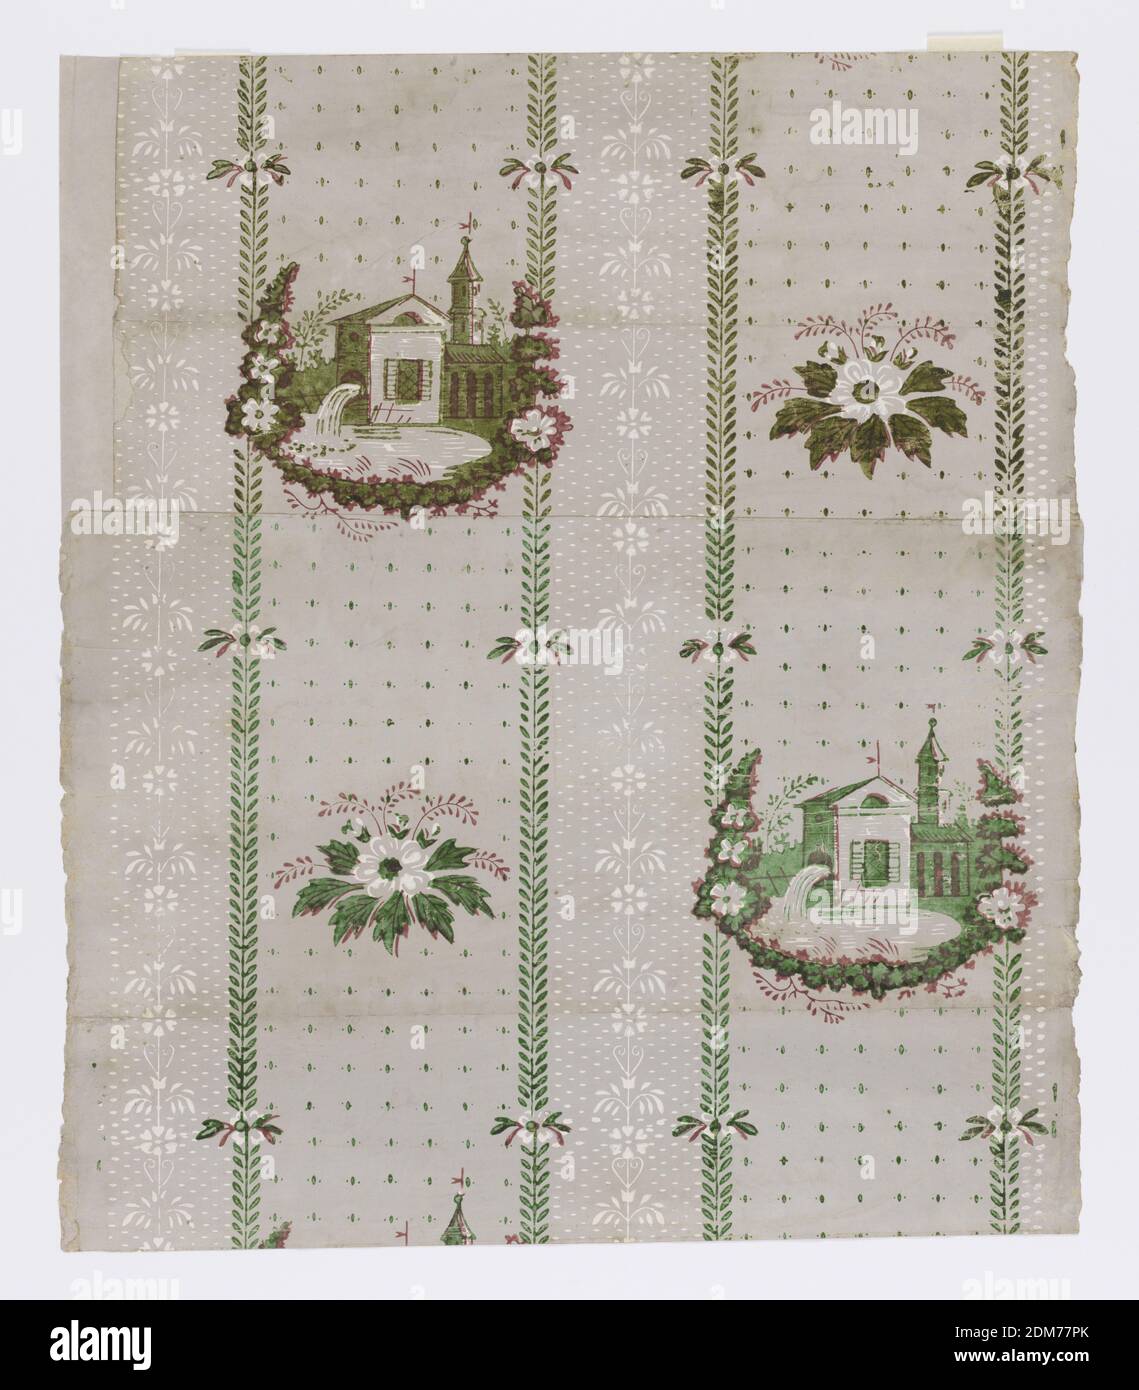 Sidewall, Block printed on joined sheets, Floral stripes with alternating thin and thick bands. Thick bands contains alternating water mills and floral designs. Printed in varnished green, red and white on gray ground., USA, ca. 1800, Wallcoverings, Sidewall Stock Photo